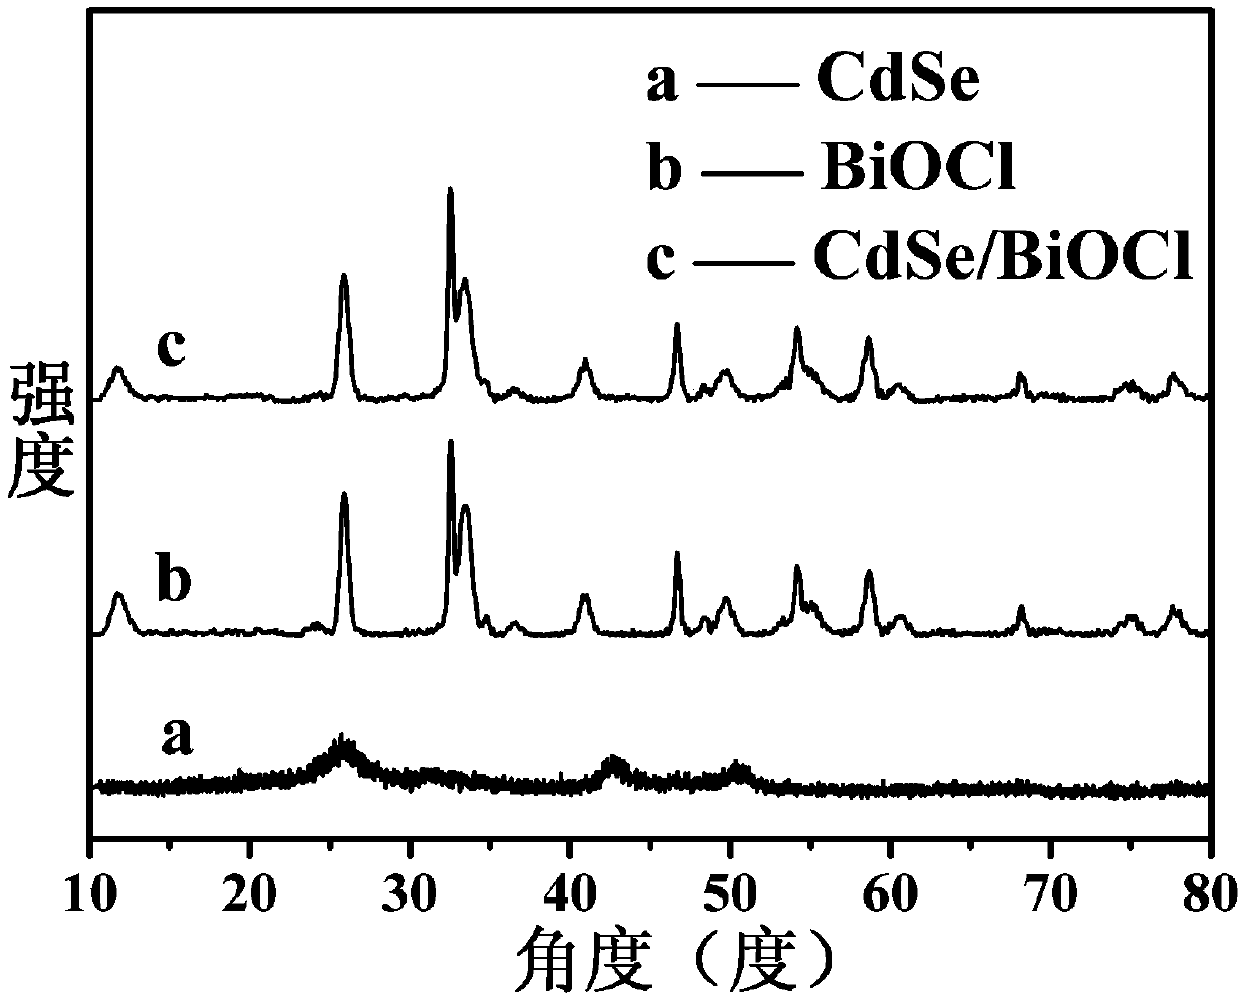 Preparation and application of CdSe/BiOCl-based composite photocatalyst